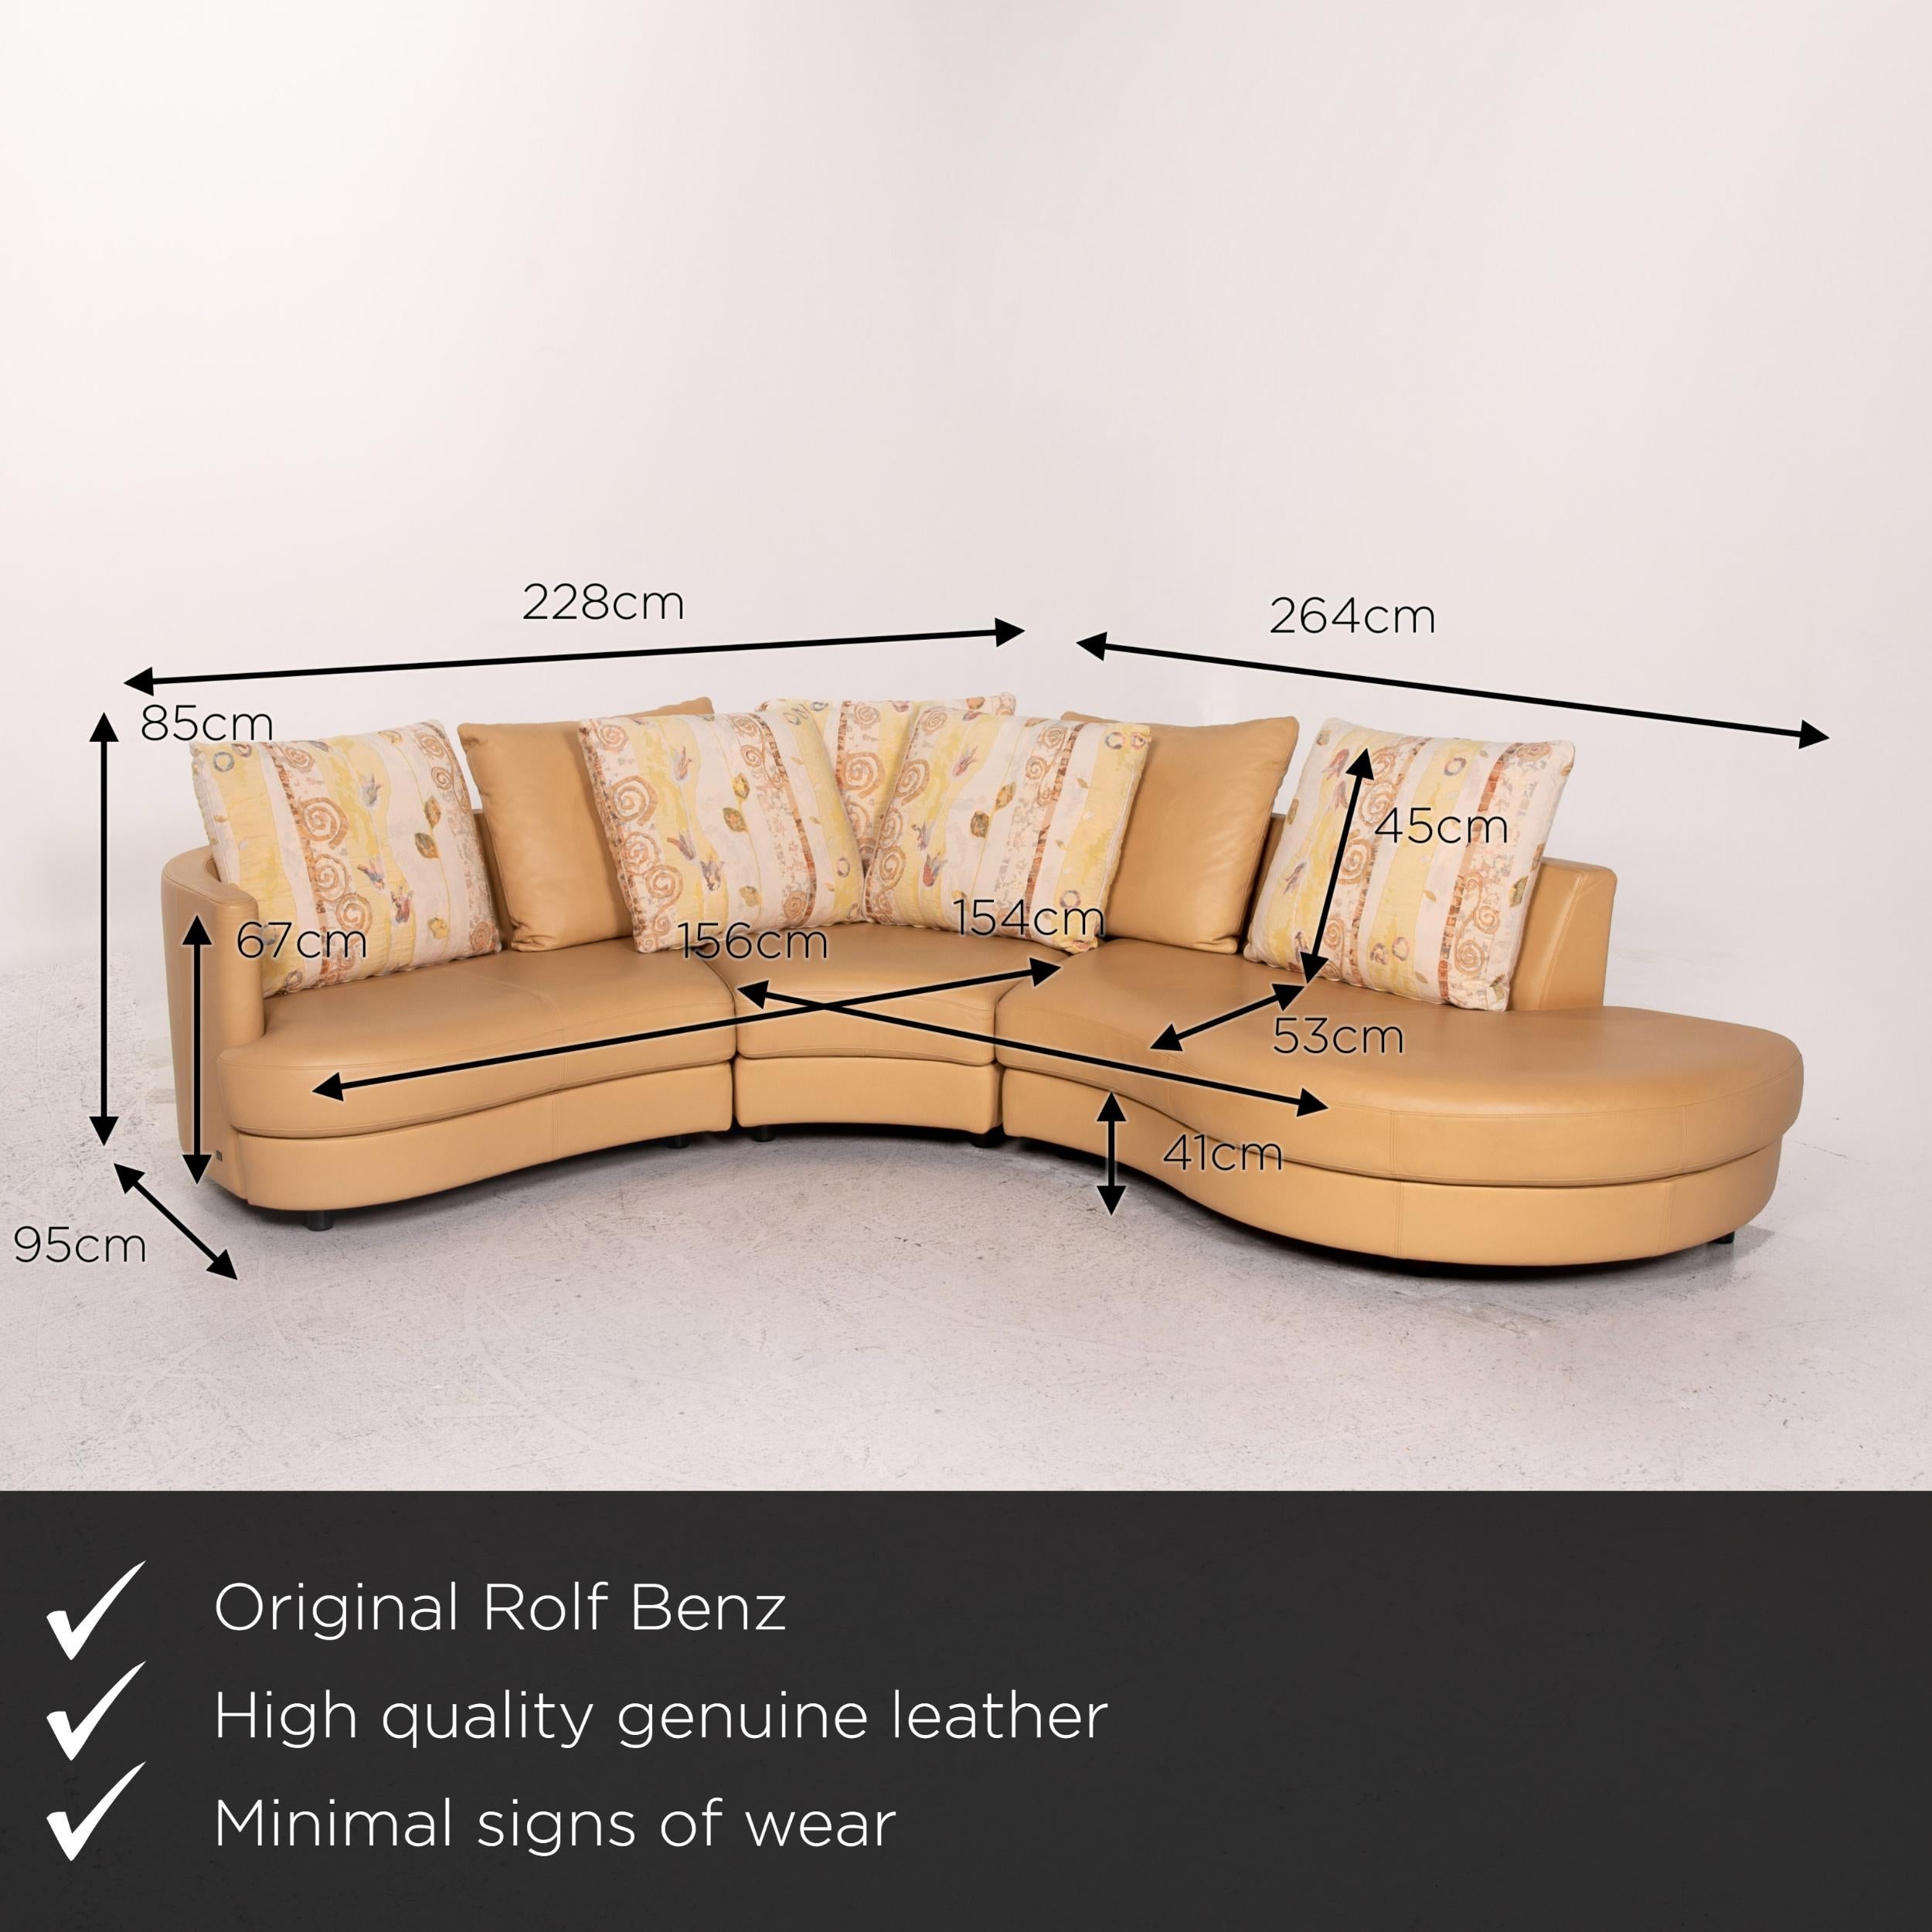 We present to you a Rolf Benz leather corner sofa beige patterned sofa couch.
    
 

 Product Measurements in centimeters:
 

Depth 95
Width 228
Height 85
Seat height 41
Rest height 67
Seat depth 53
Seat width 154
Back height 45.